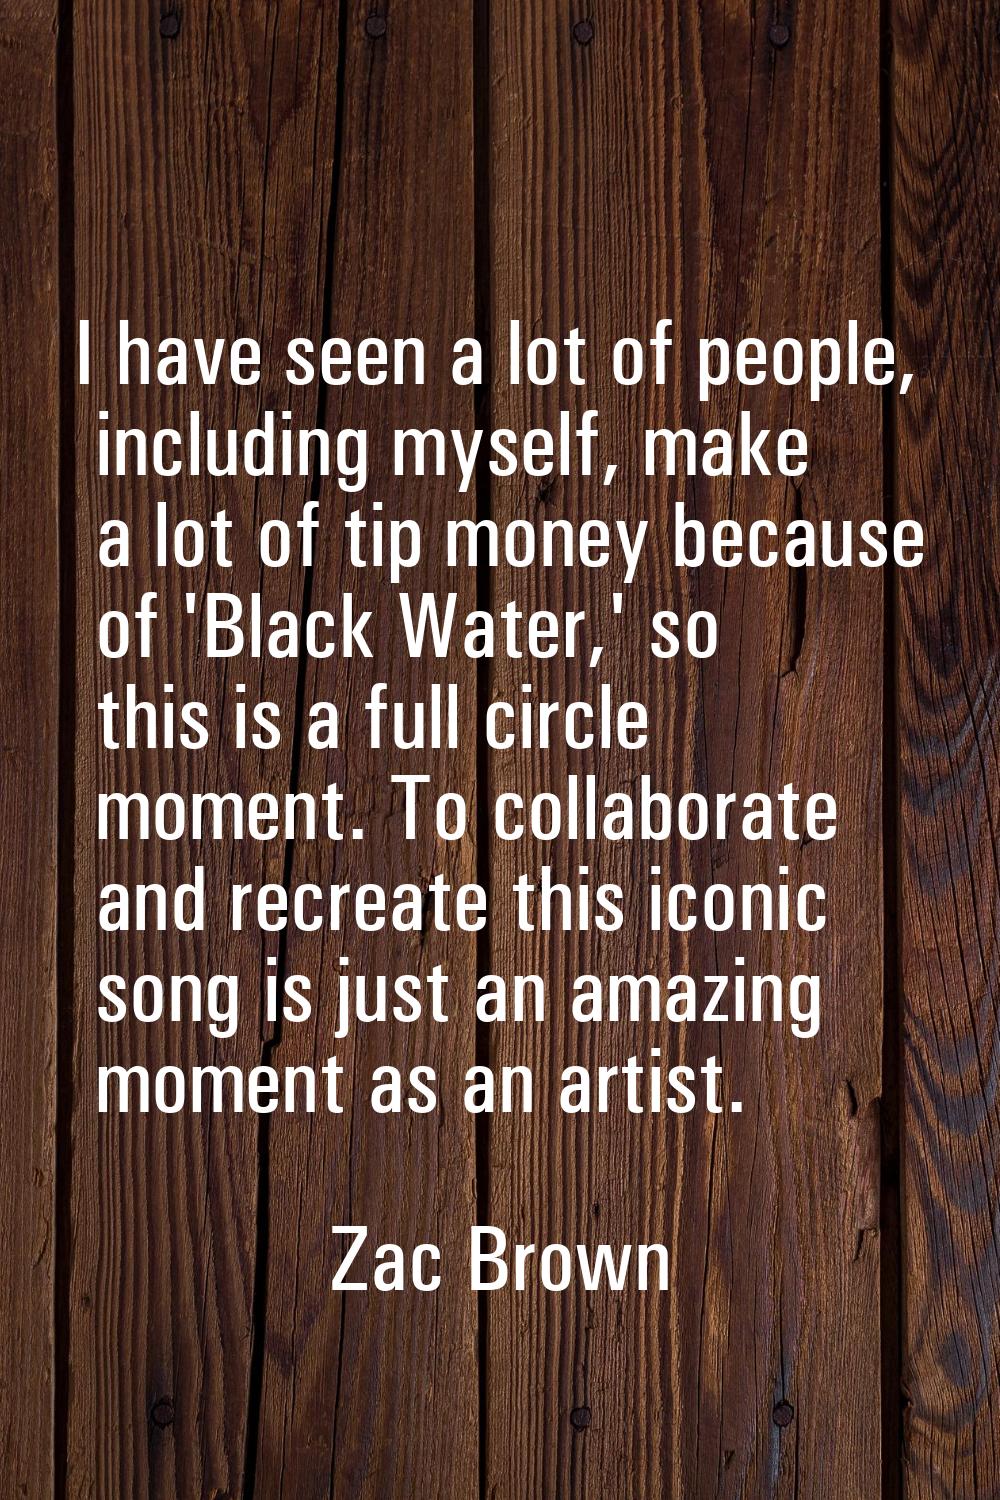 I have seen a lot of people, including myself, make a lot of tip money because of 'Black Water,' so